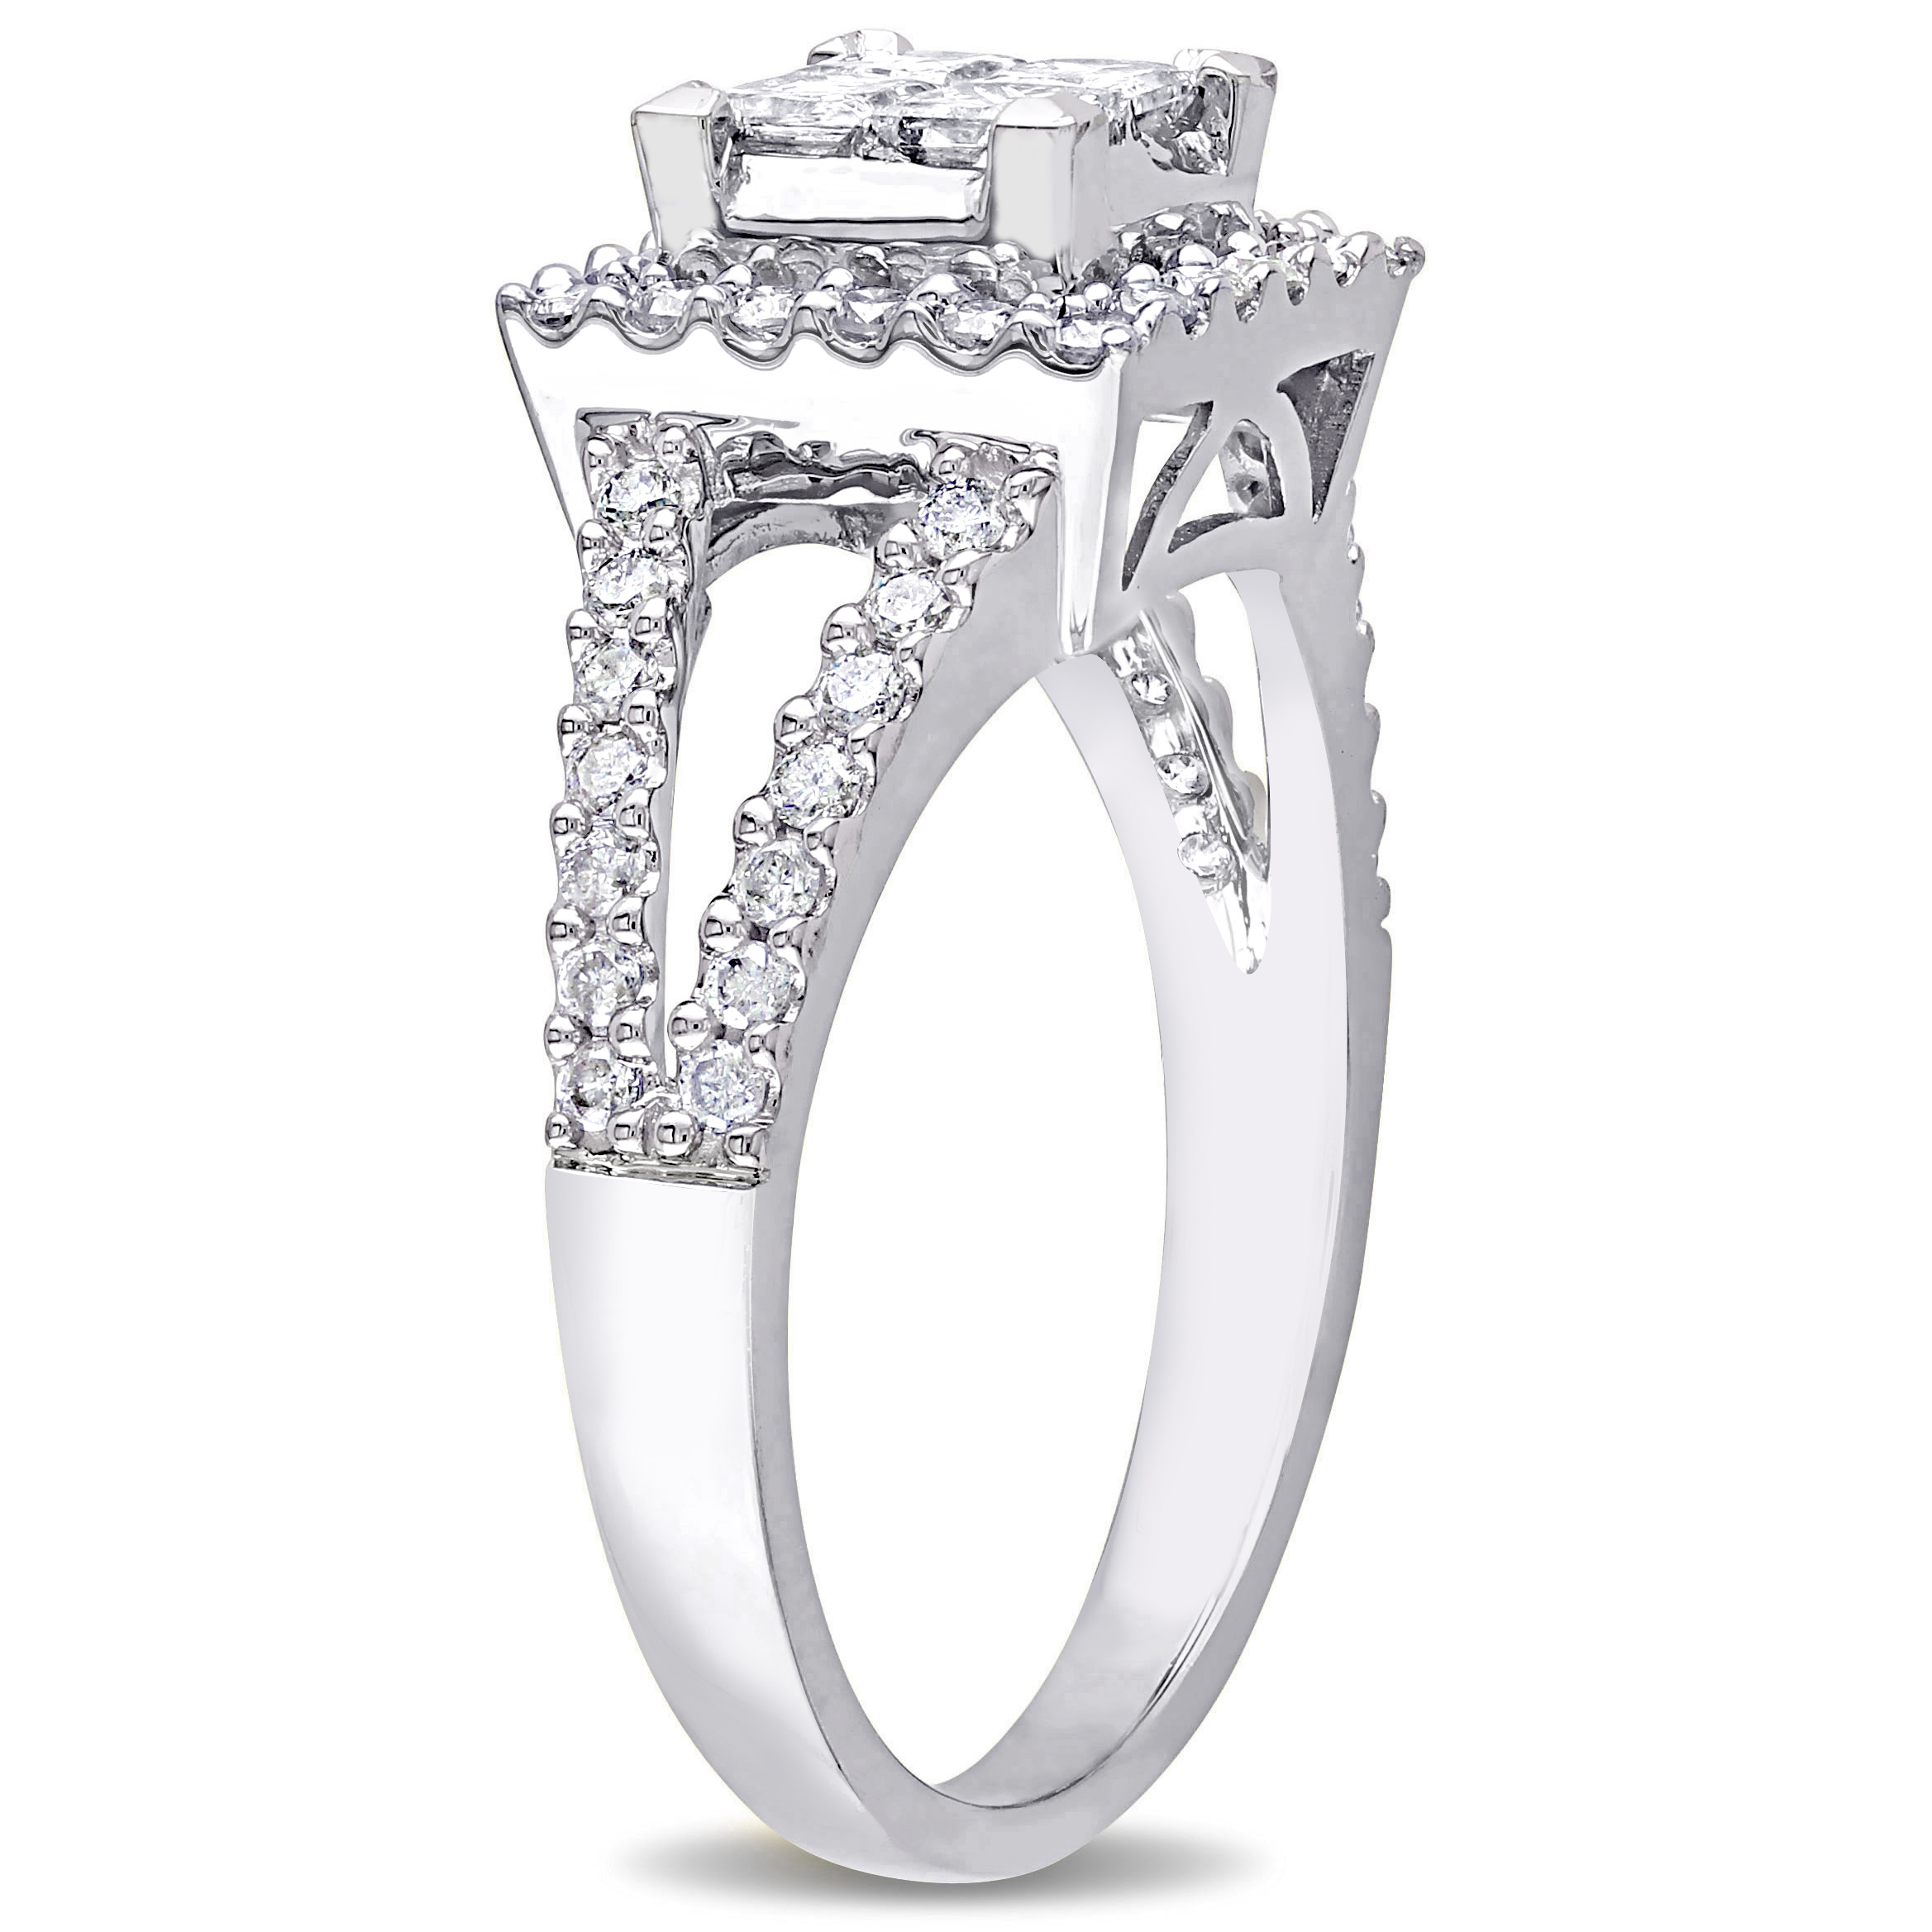 1 CT TW Princess Cut Quad and Round Diamond Halo Split Shank Engagement Ring in 14k White Gold